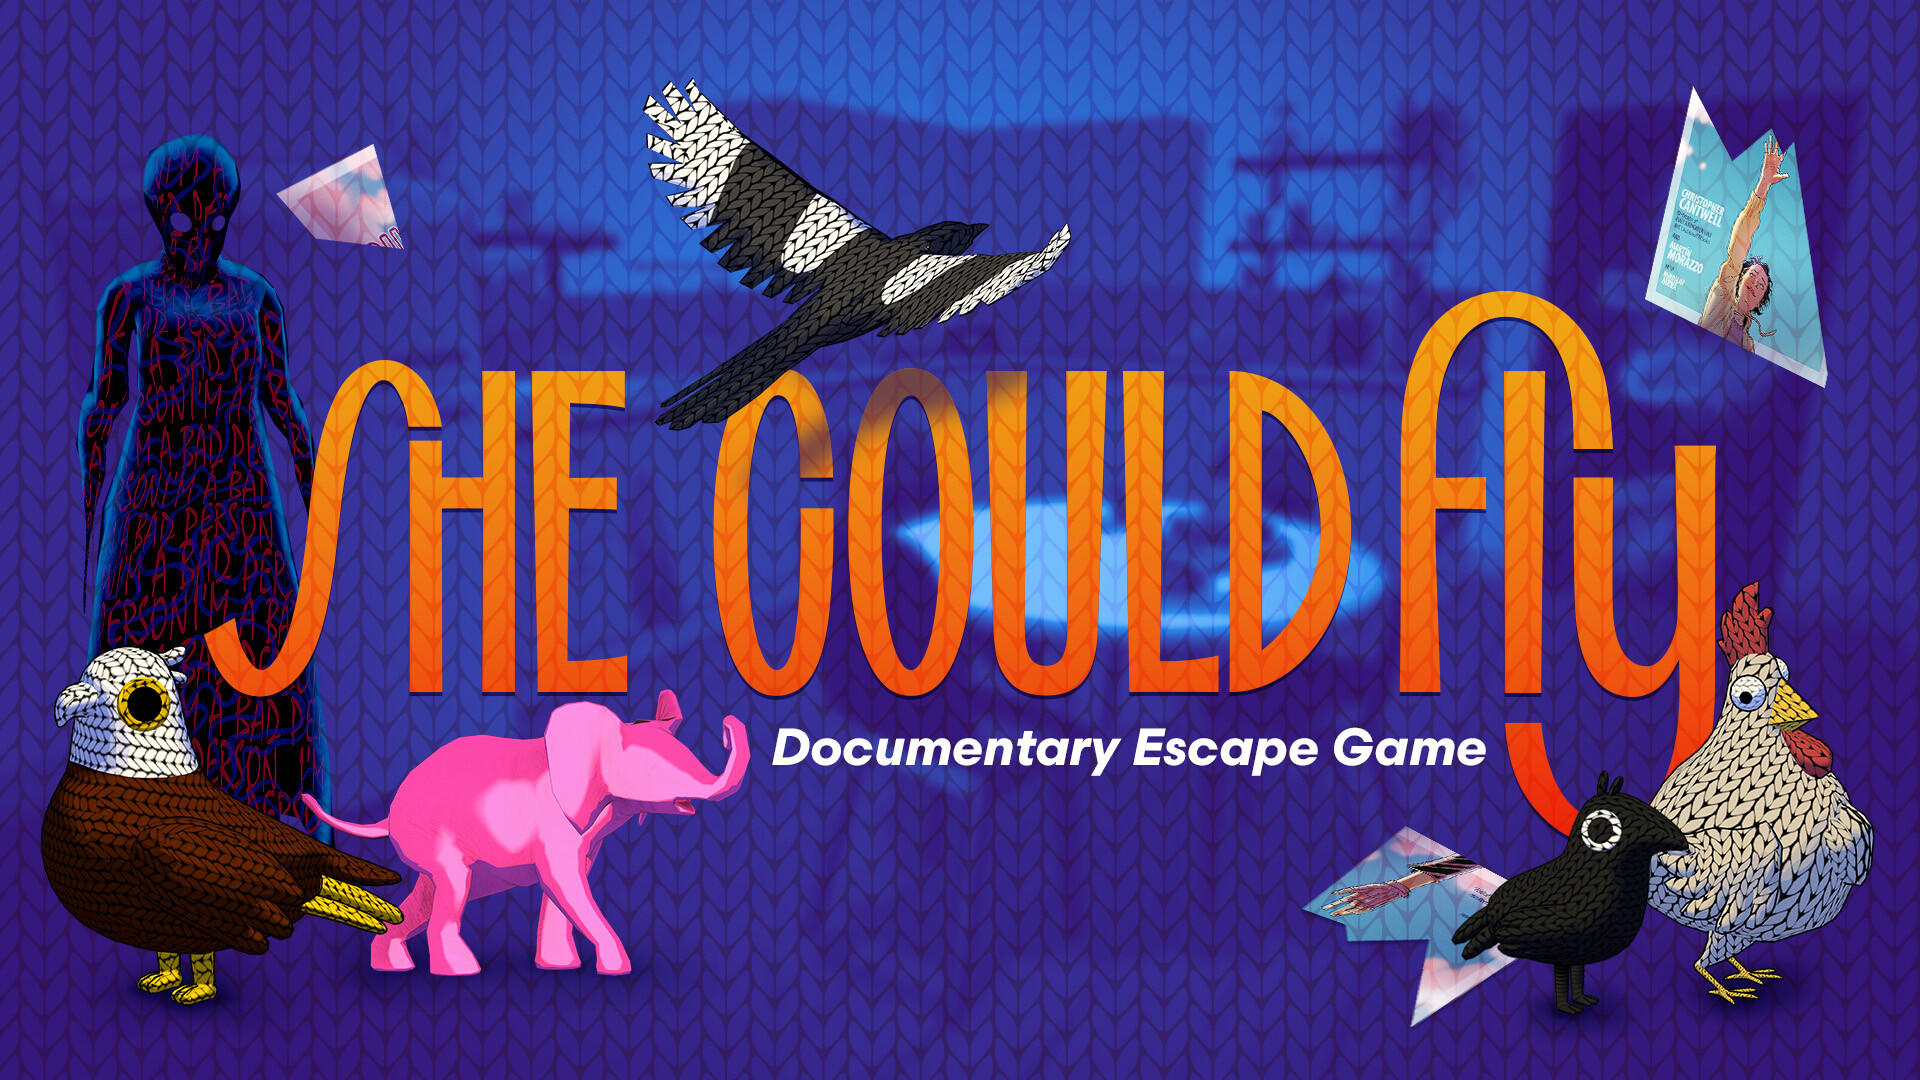 She Could Fly: Documentary Escape Game 게임 스크린 샷